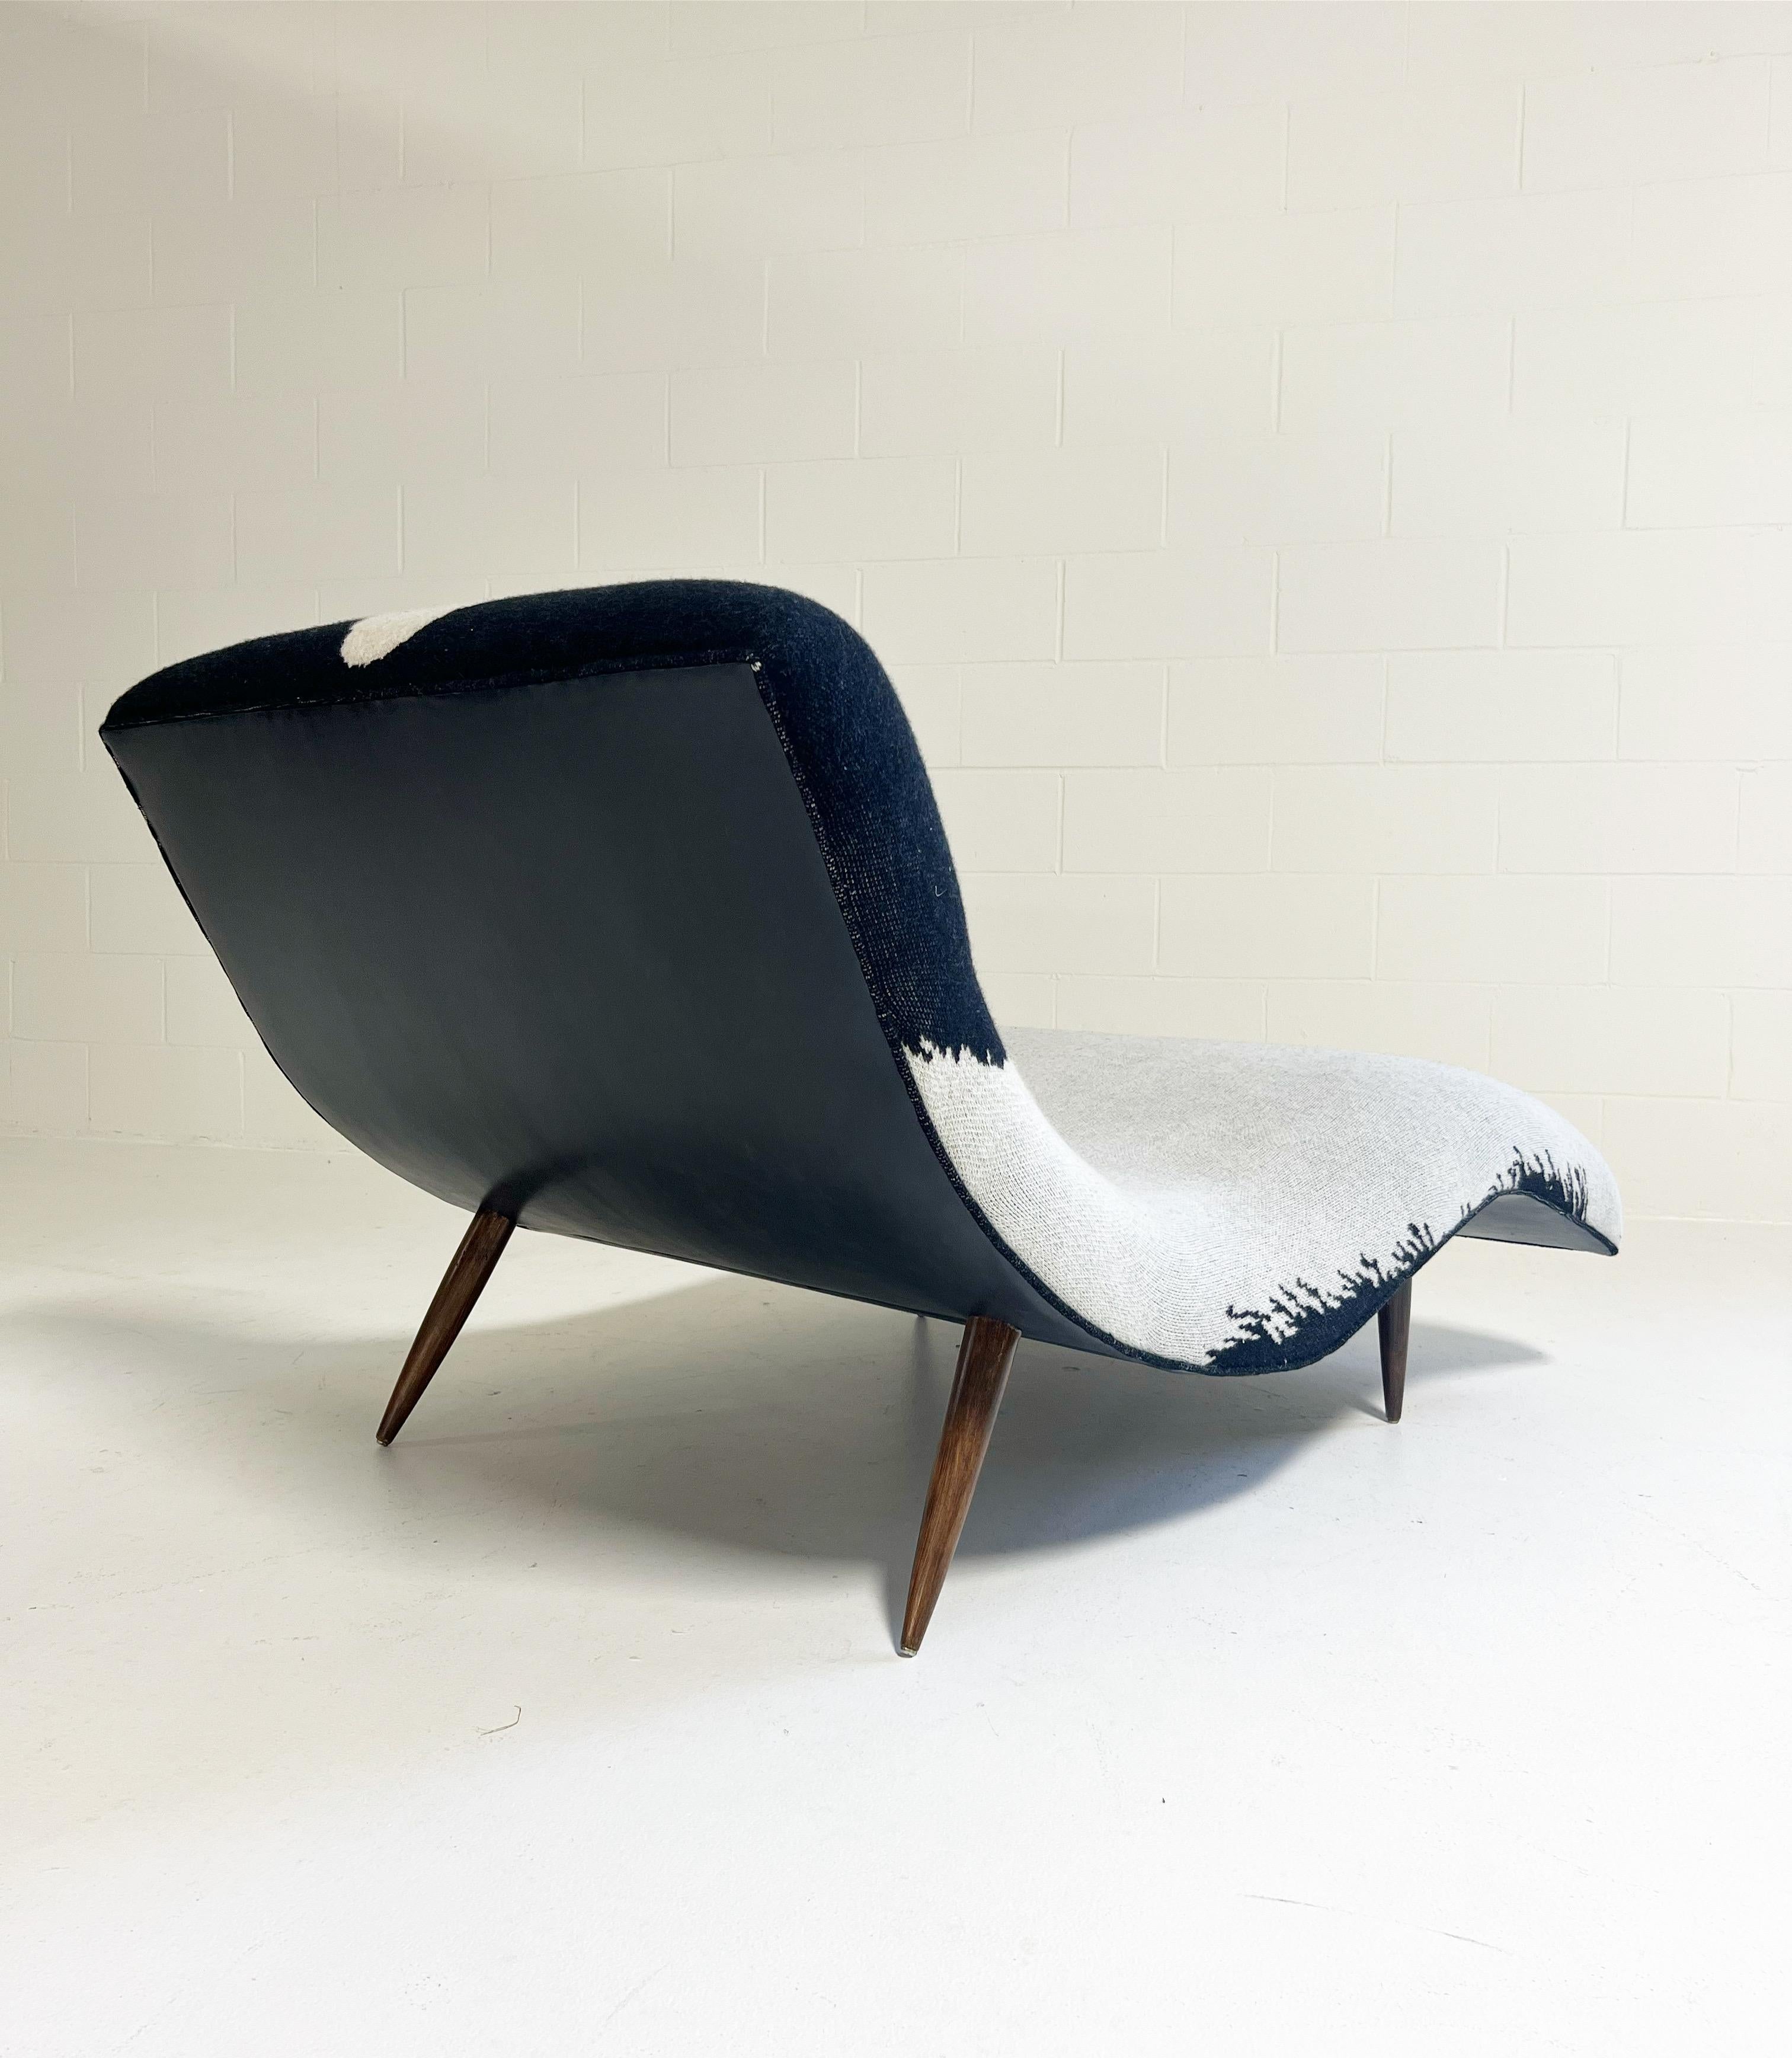 20th Century Vintage Adrian Pearsall Wave Chaise Lounge in Cashmere and Leather For Sale